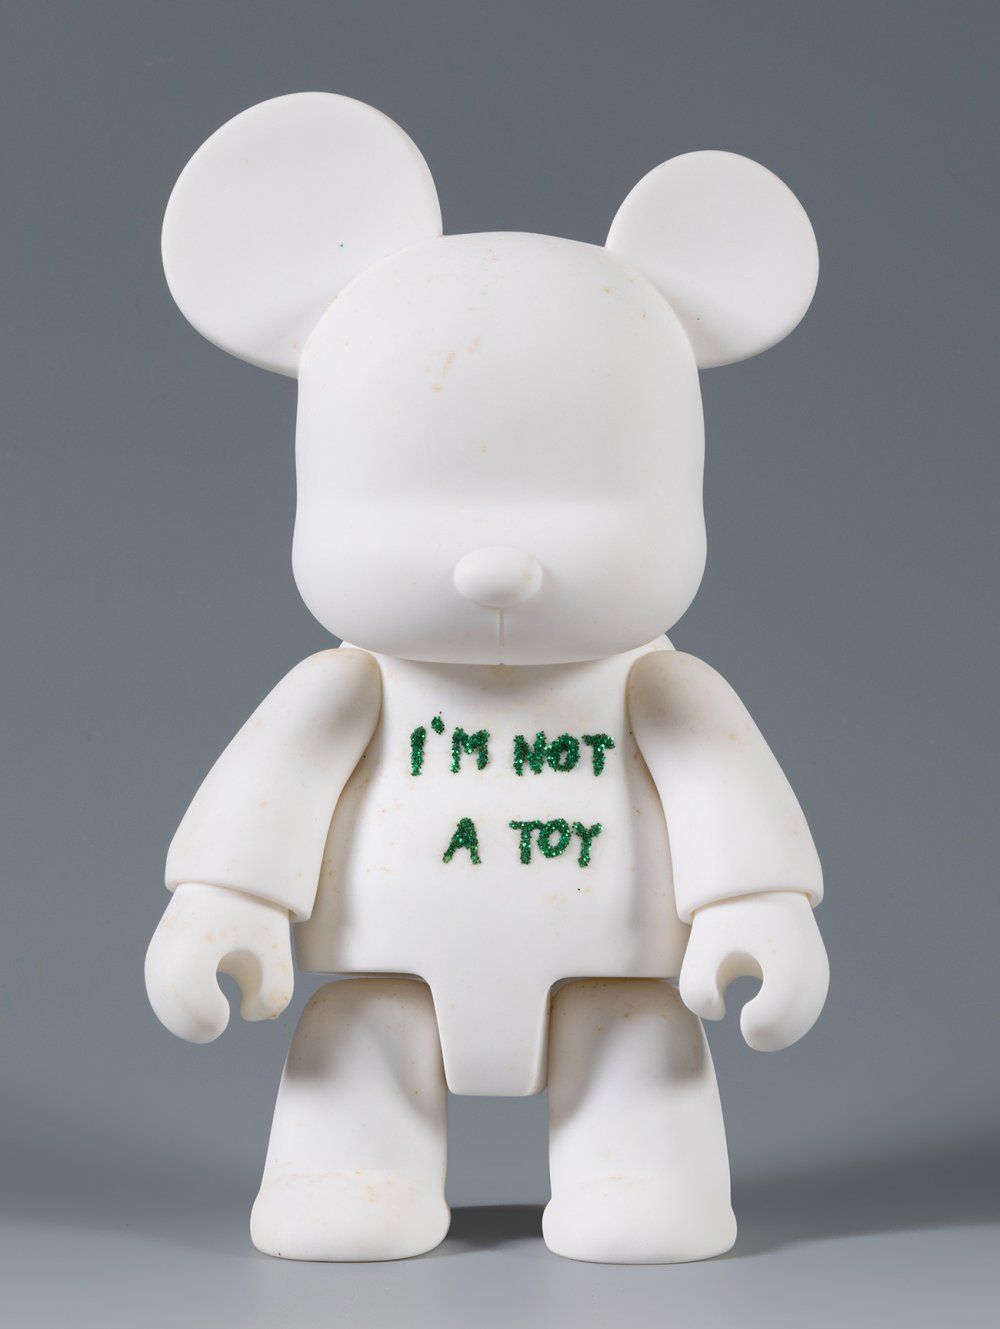 Null VALENTINA MIORANDI（意大利，1982年）。
Toy 2r "Im not a toy of yours", 2012.
涂料和树脂。&hellip;